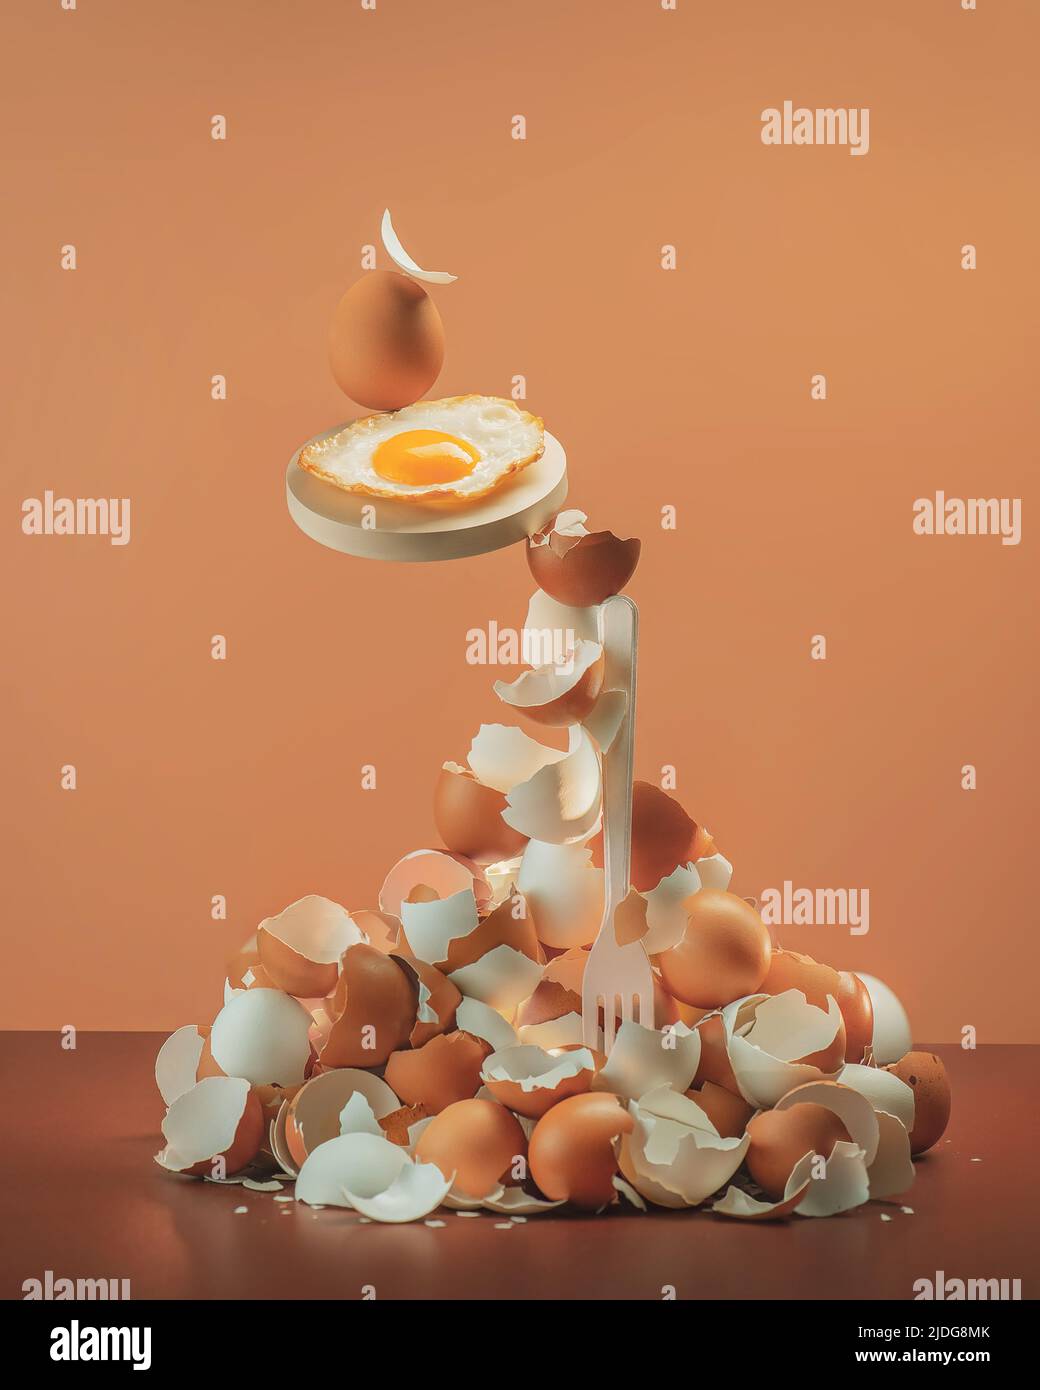 Pile of egg shells with a fried egg balancing on a fork, equilibrium, creative food photo Stock Photo